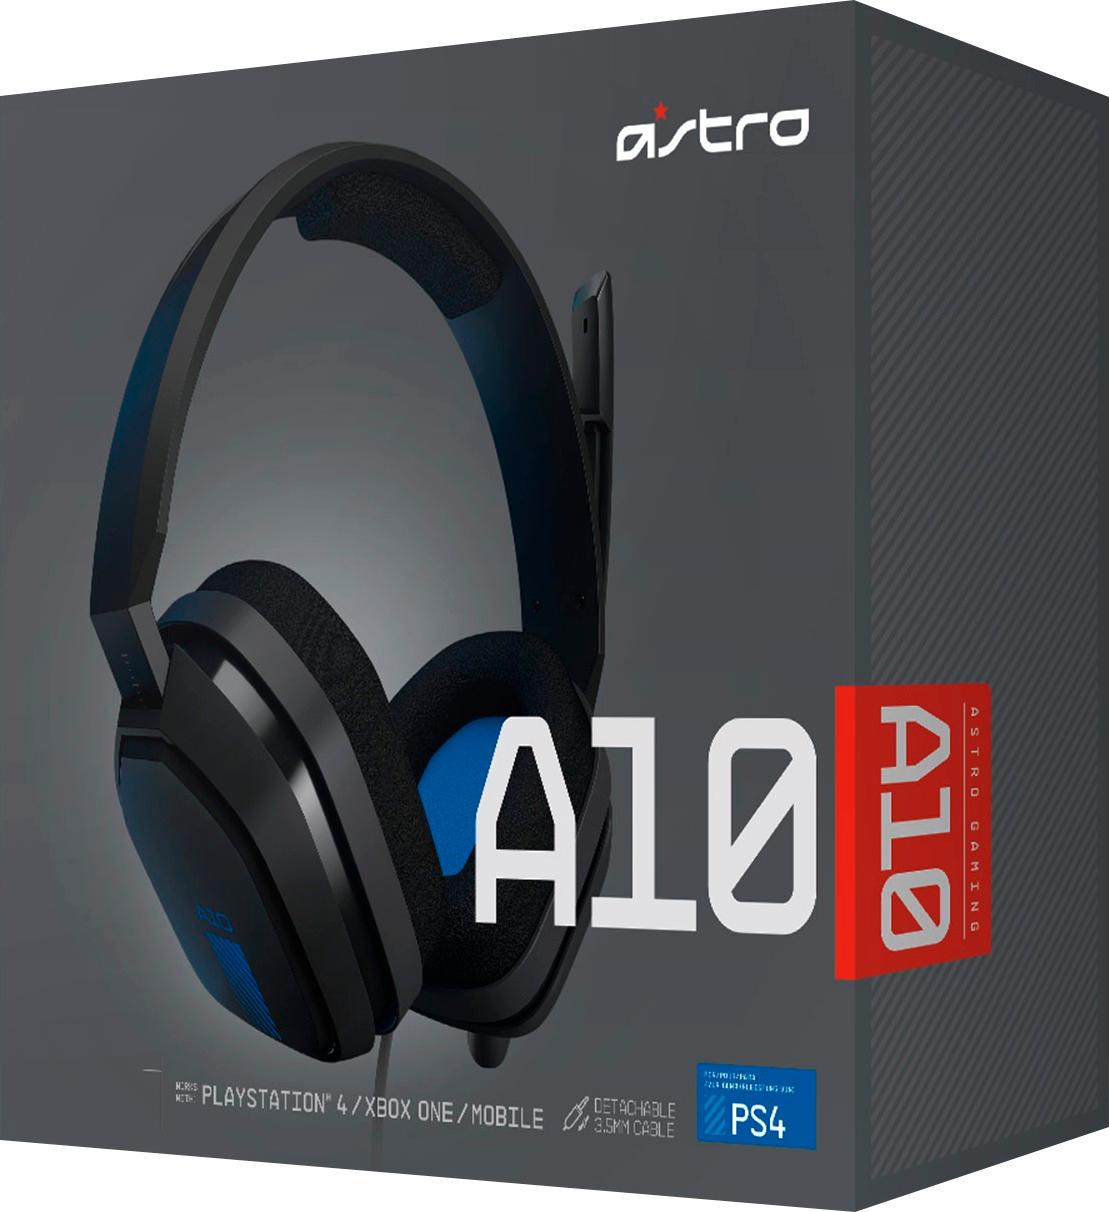 Astro Gaming - A10 Wired Stereo Gaming Headset for PlayStation 4 - Blue/black